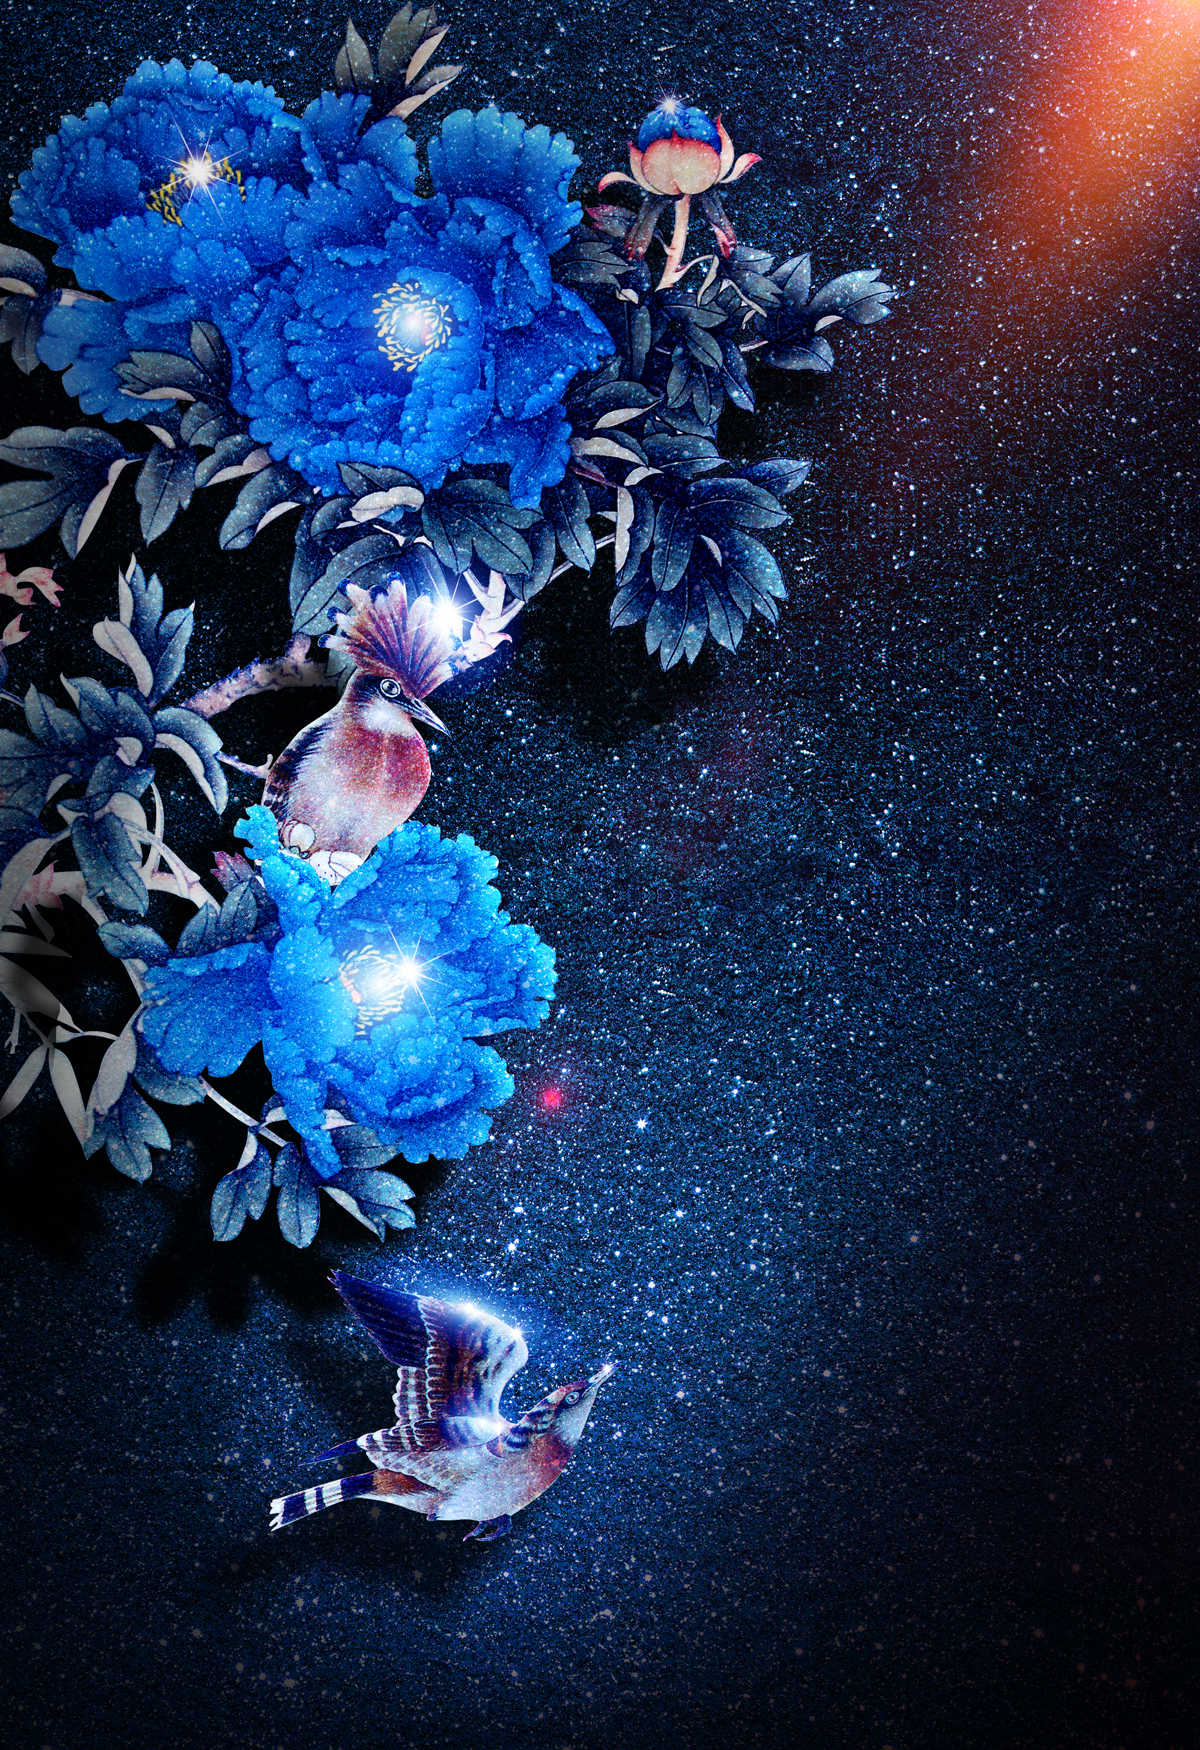 Under the night sky of flowers - China PSD File Free Download